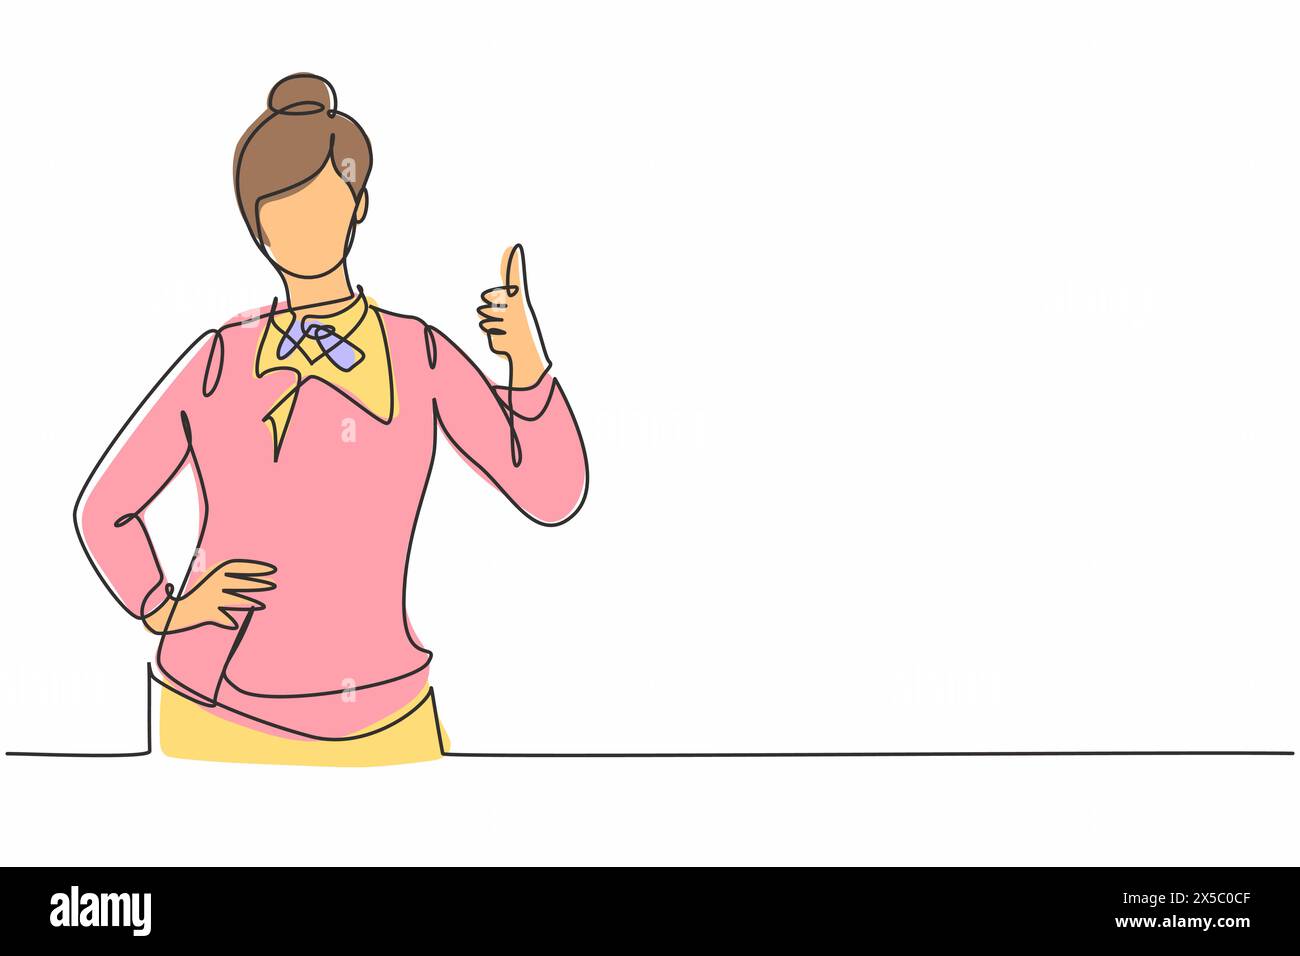 Single continuous line drawing flight attendant with a thumbs-up gesture is ready to serve airplane passengers in a friendly and warm manner. Dynamic Stock Vector